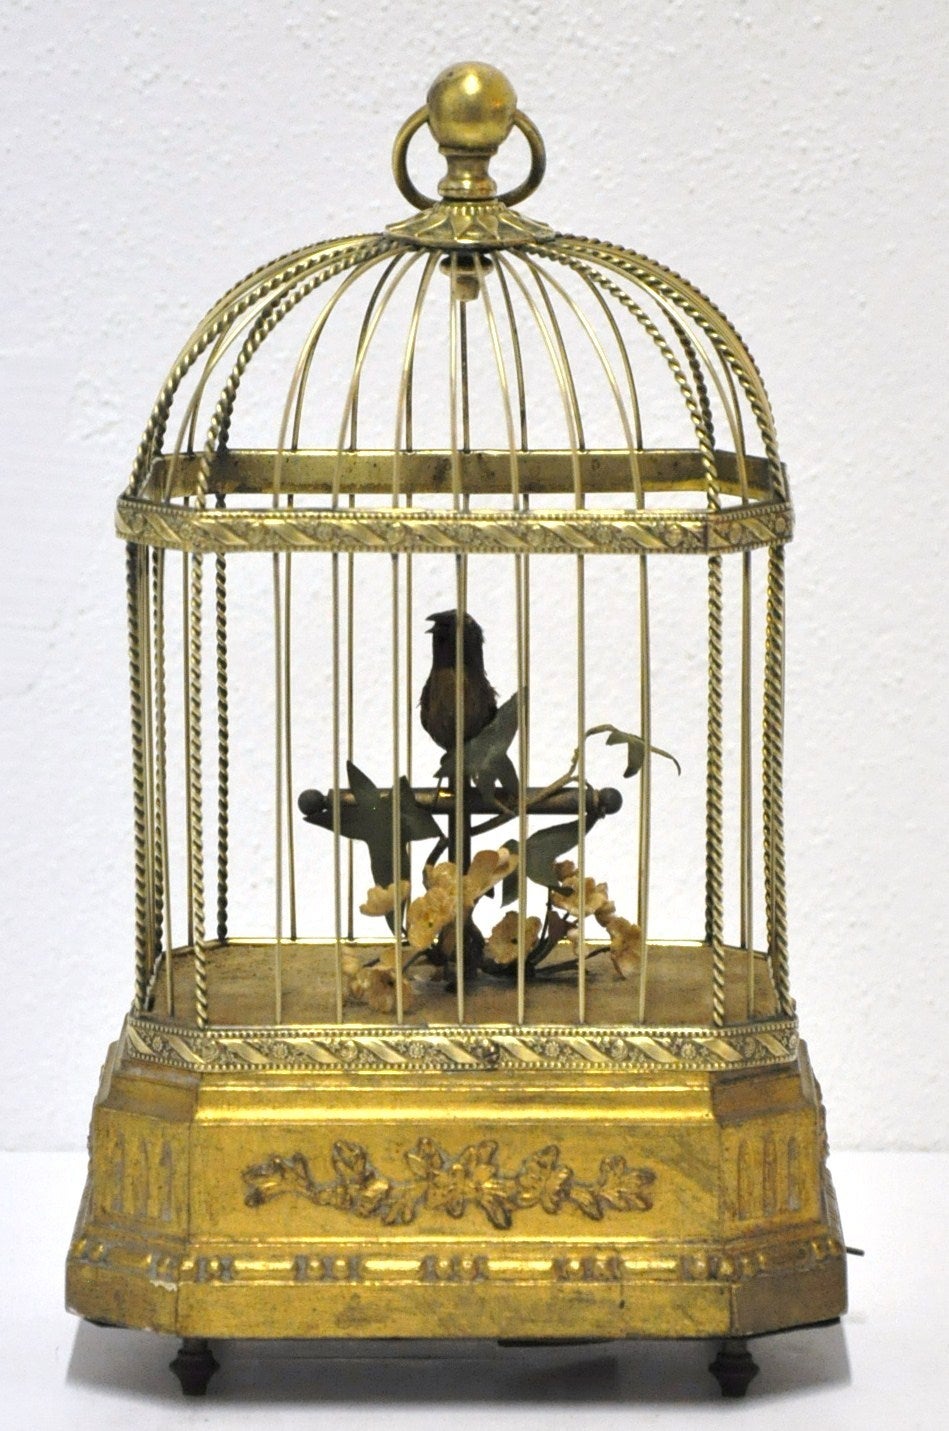 Turn of the century French (or German) bird cage with singing bird in great condition (circa 1920)